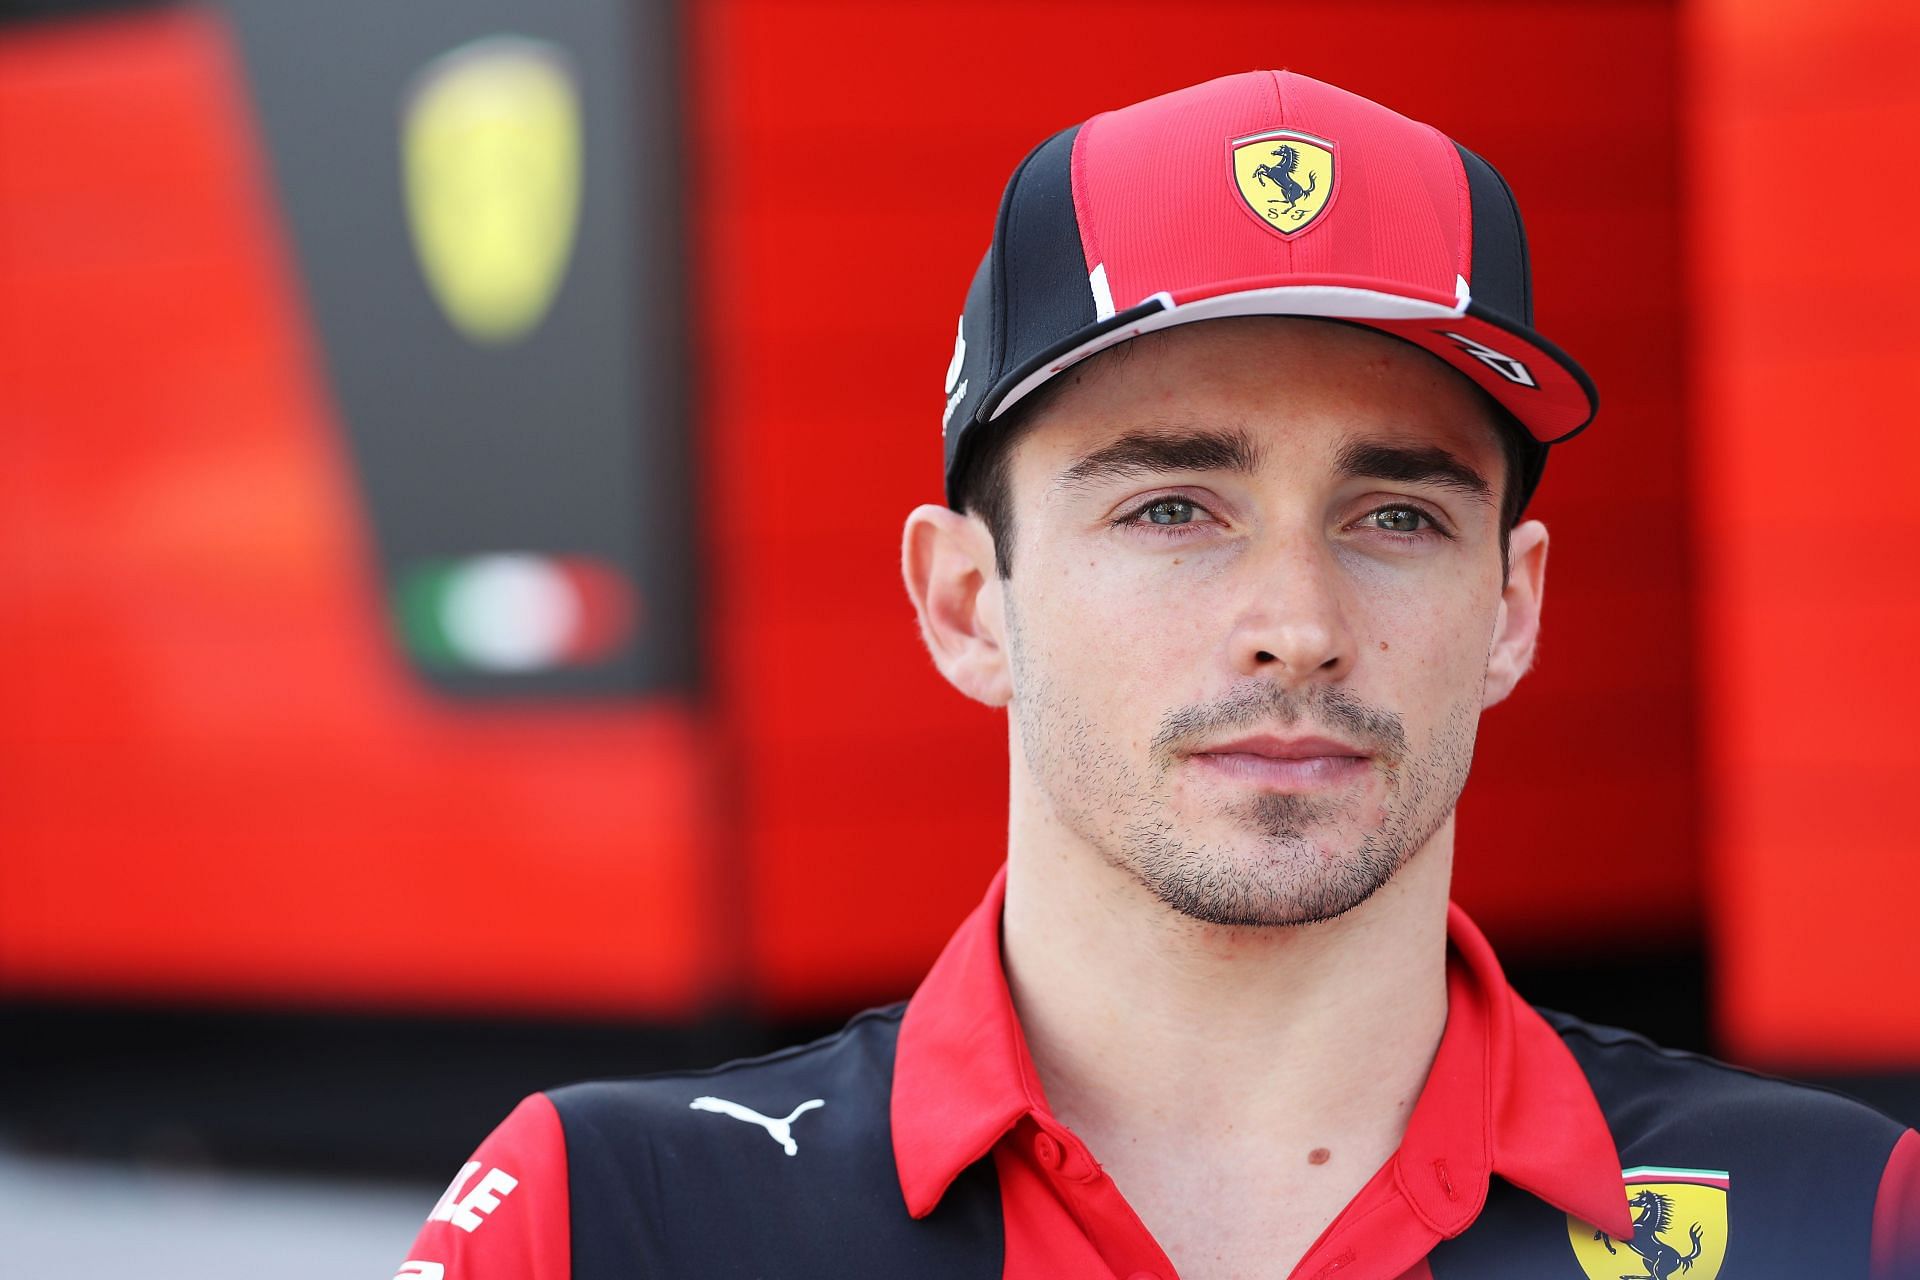 Verstappen's No1 F1 rival makes 'too many mistakes' like Leclerc